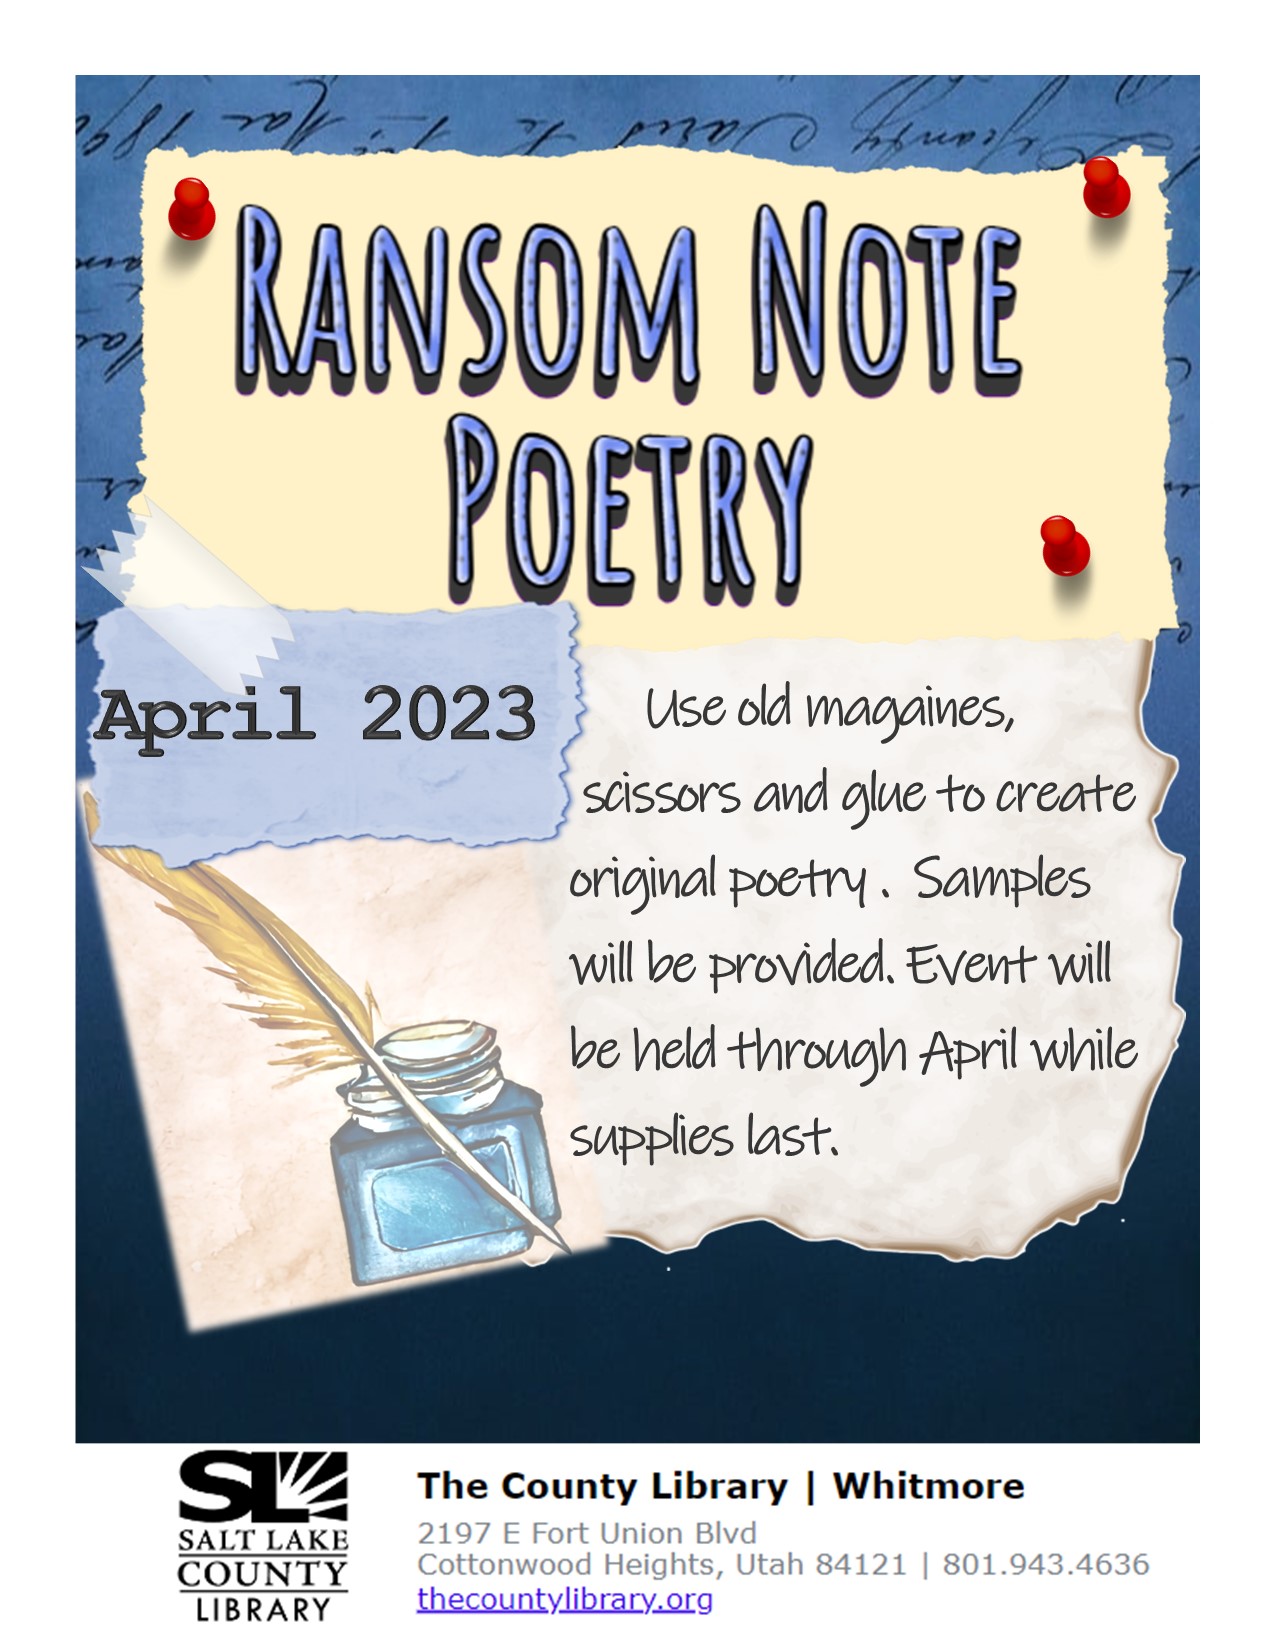 POETRY IN COLOUR Tuesday, 4, April 2023 Dance Recital: Poetic